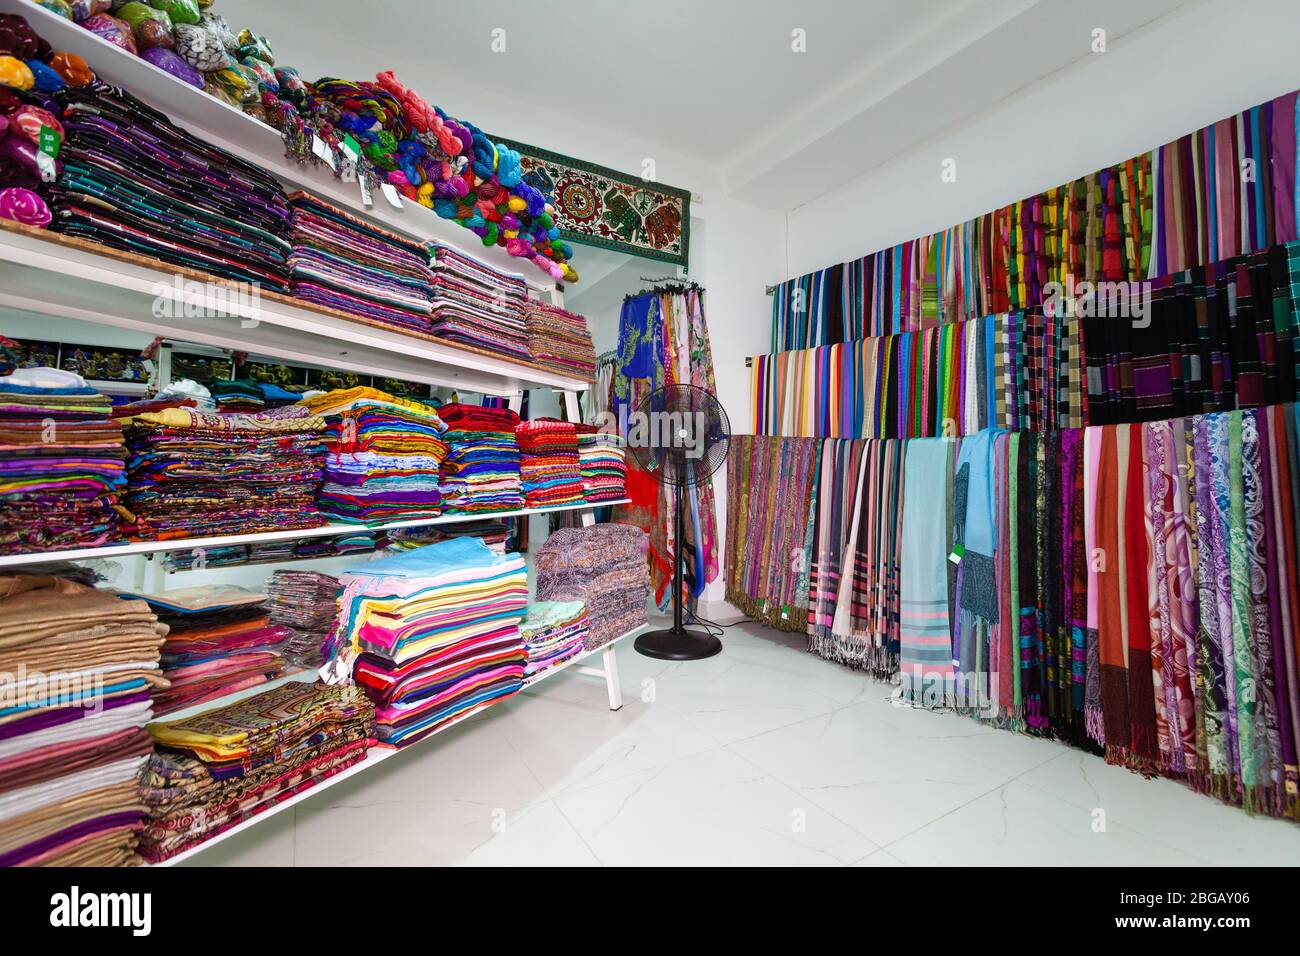 Textile shop in Indian clothing. Sari, traditional Indian dress. Shelves with fabrics of various colors. Location: Kandy, Sri Lanka Stock Photo